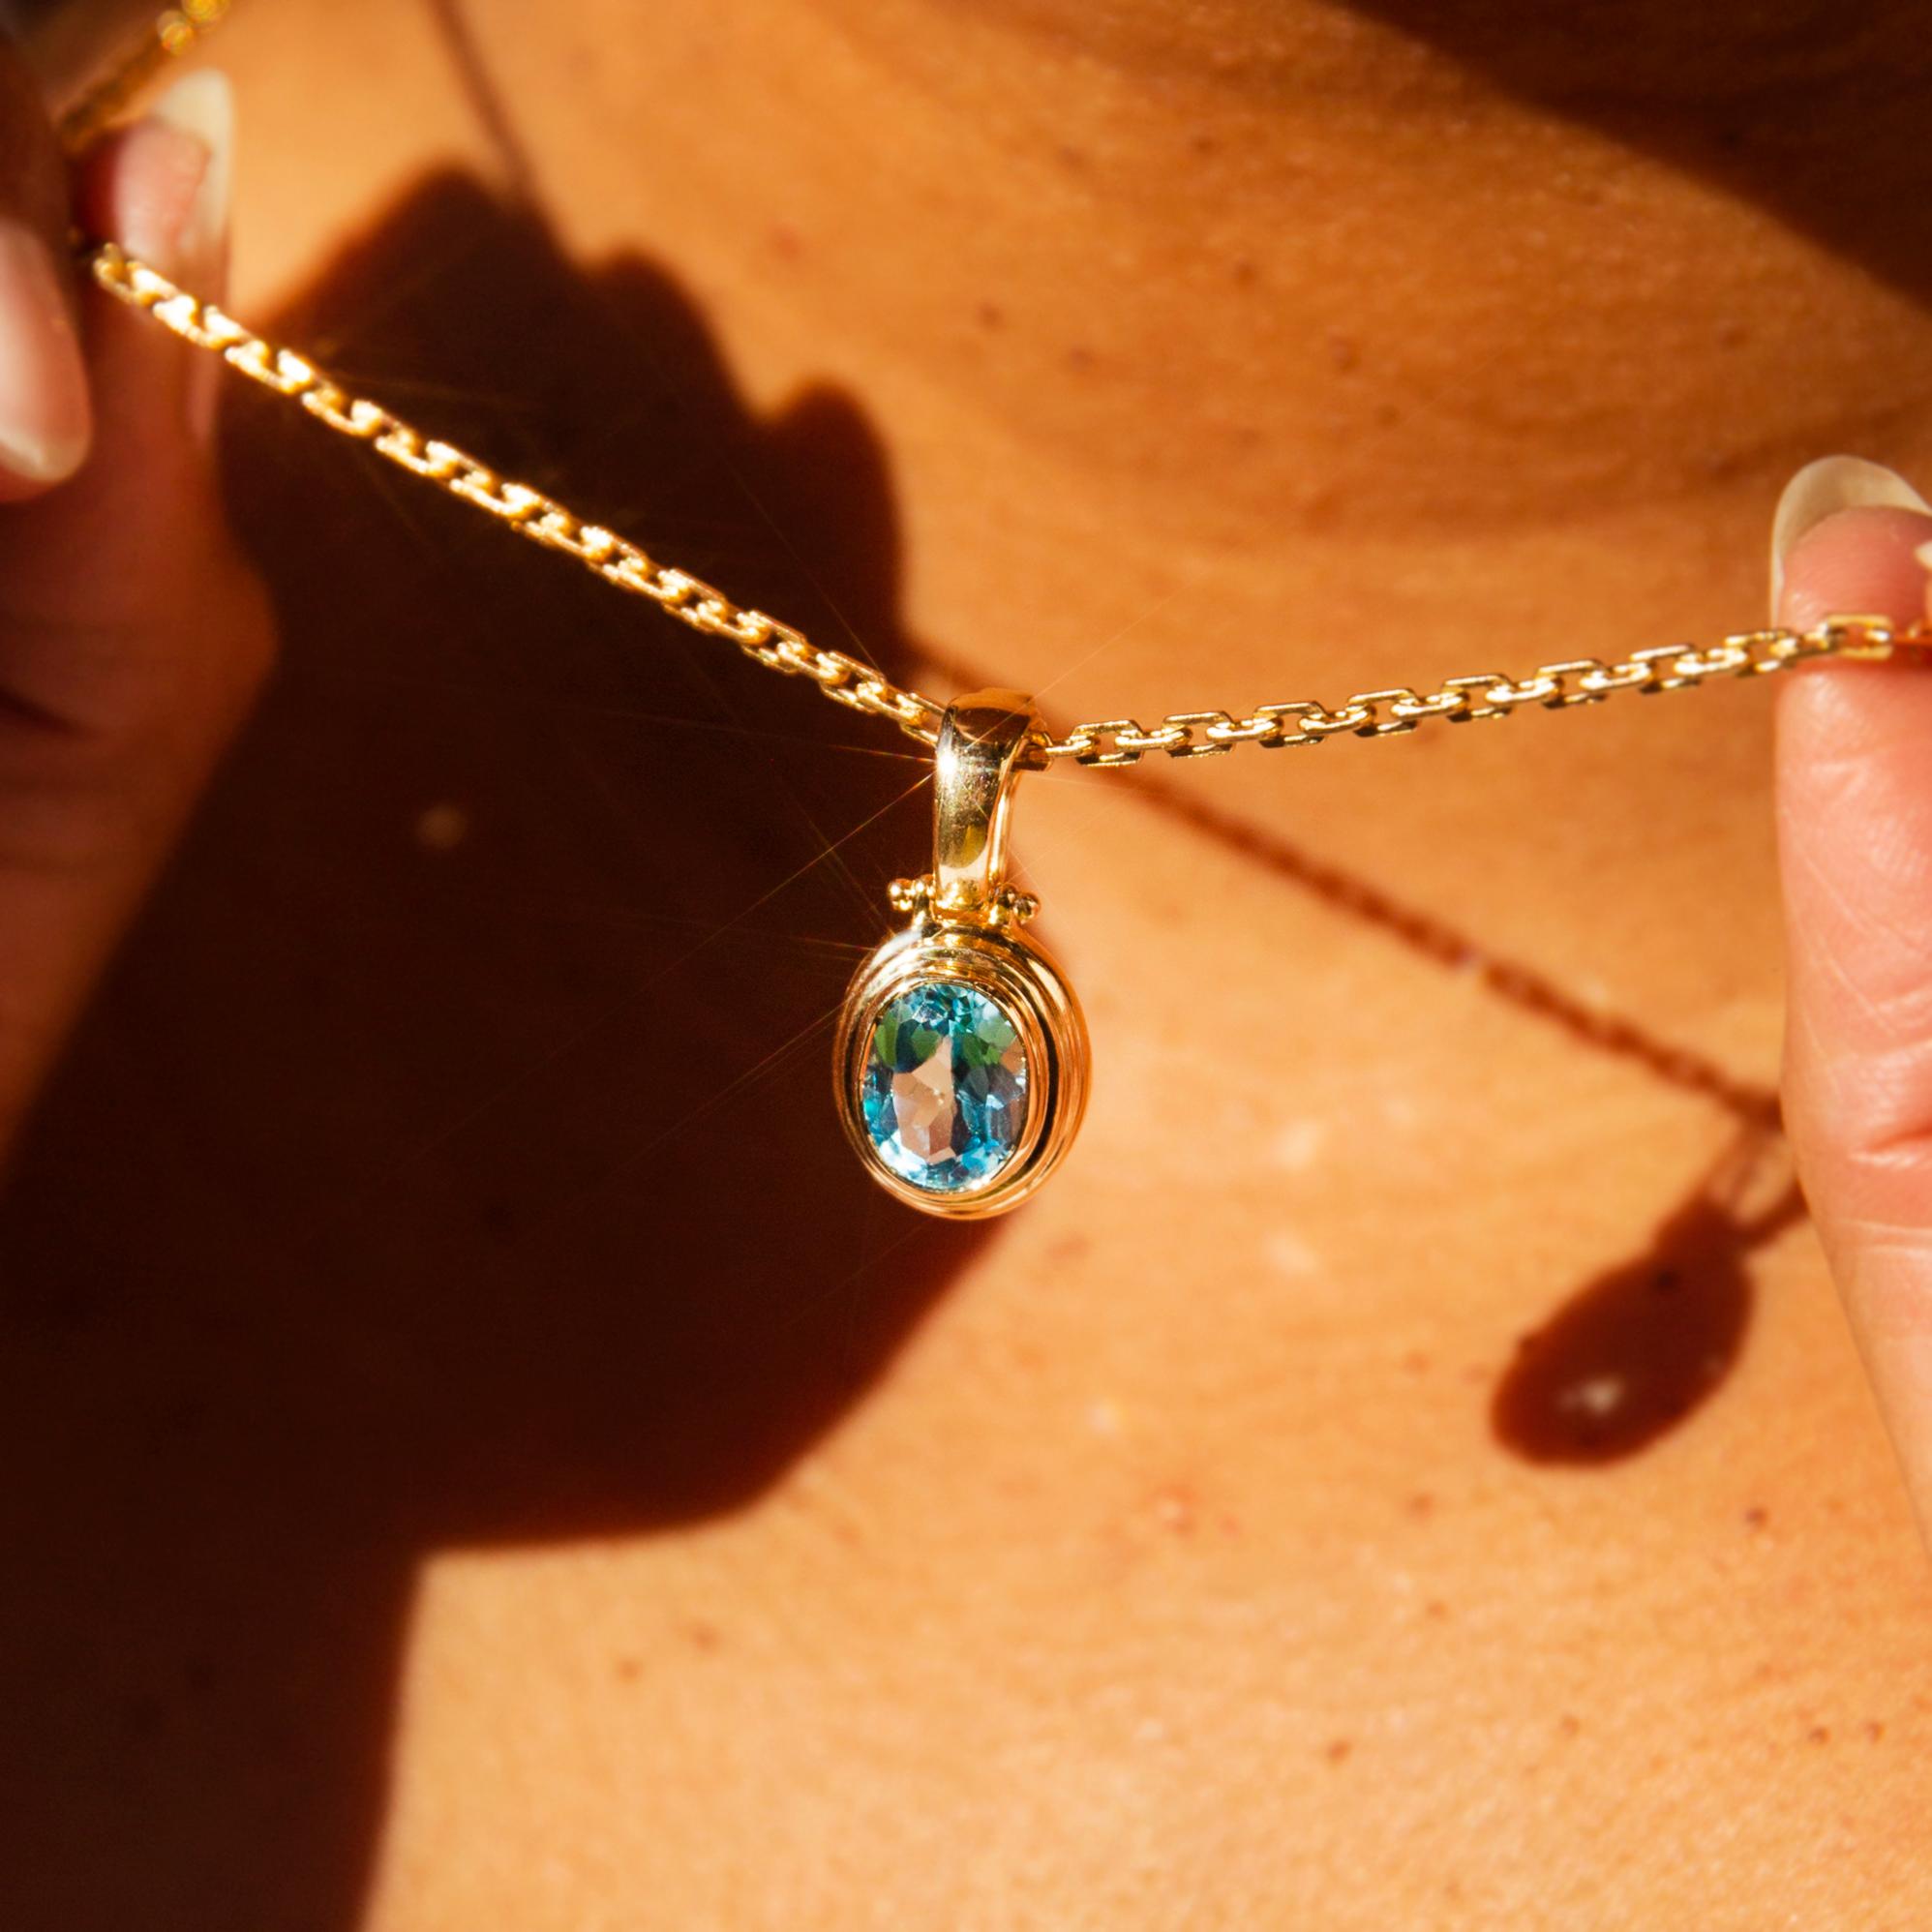 Crafted in 9 carat gold, The Mila Pendant is a sweet offering blessed with a sky blue topaz as clear and bright as a warm summer's day. A lovely inclusion in any collection, she is threaded with a sensual fine chain.

The Mila Pendant & Chain Gem